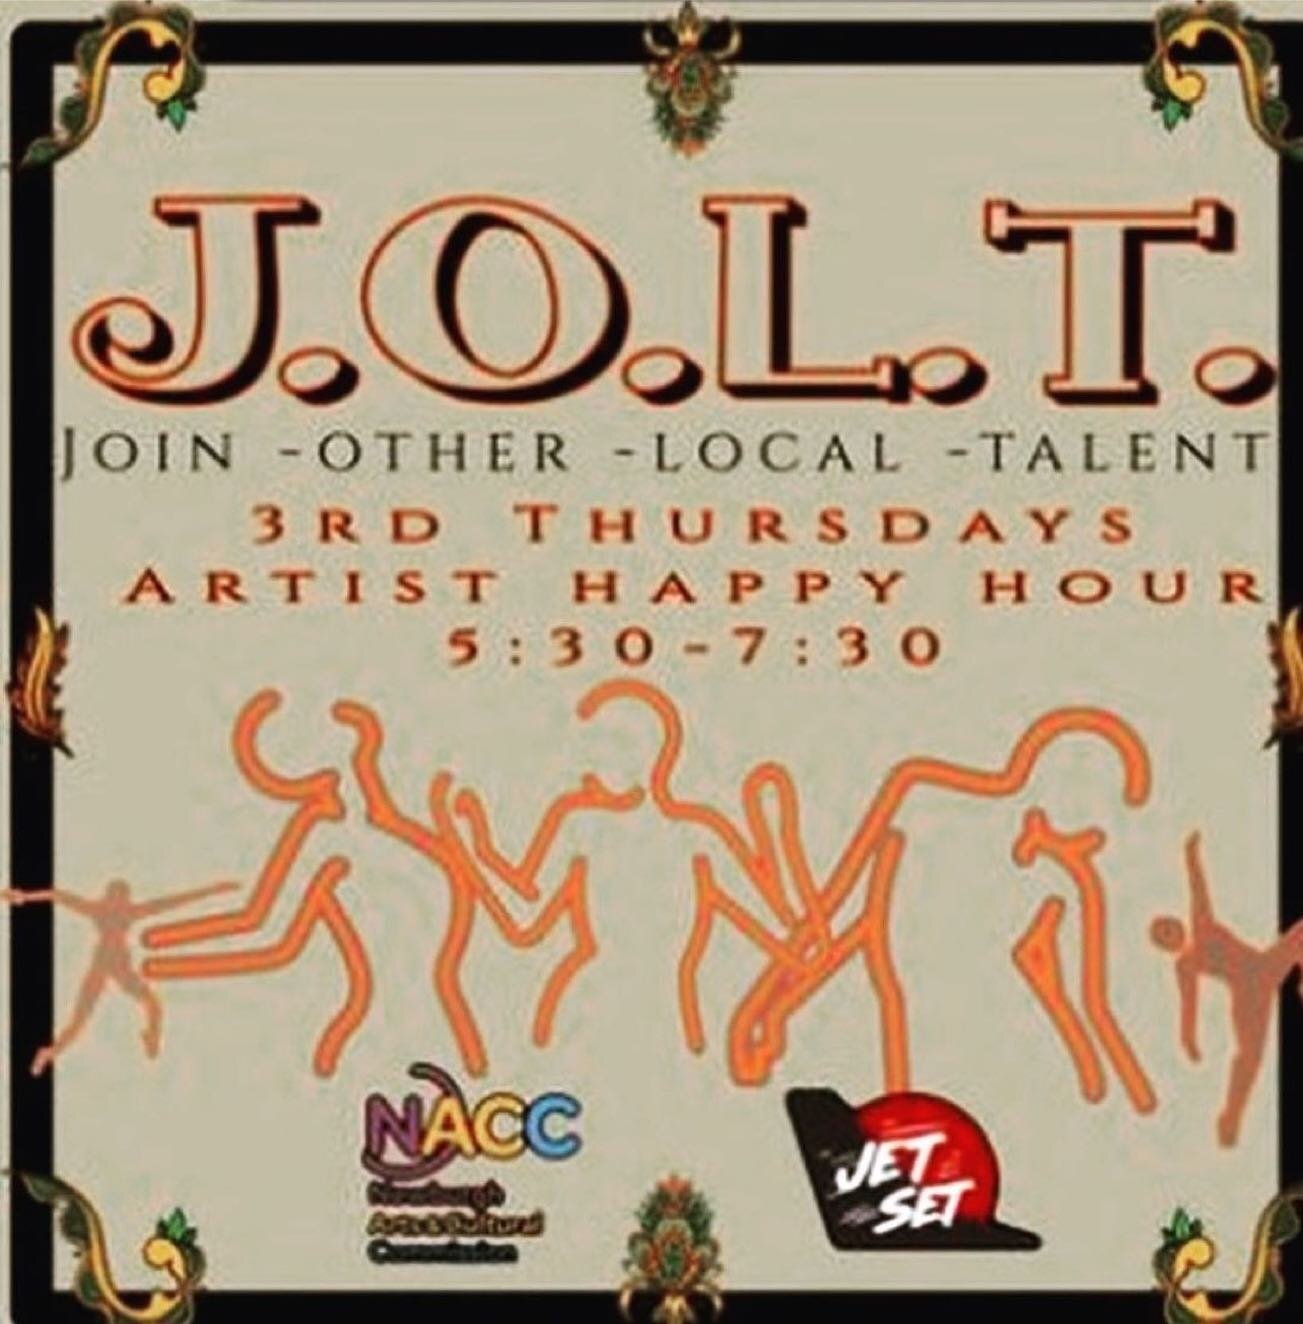 Repost from @newburghartsculture
&bull;
TONIGHT! J.O.L.T. -- Joining Other Local Talent. J.O.L.T. is a monthly meetup for Newburgh artists and creatives to share talents, ideas, opportunities, resources and to just hang out. 

J.O.L.T. was previously